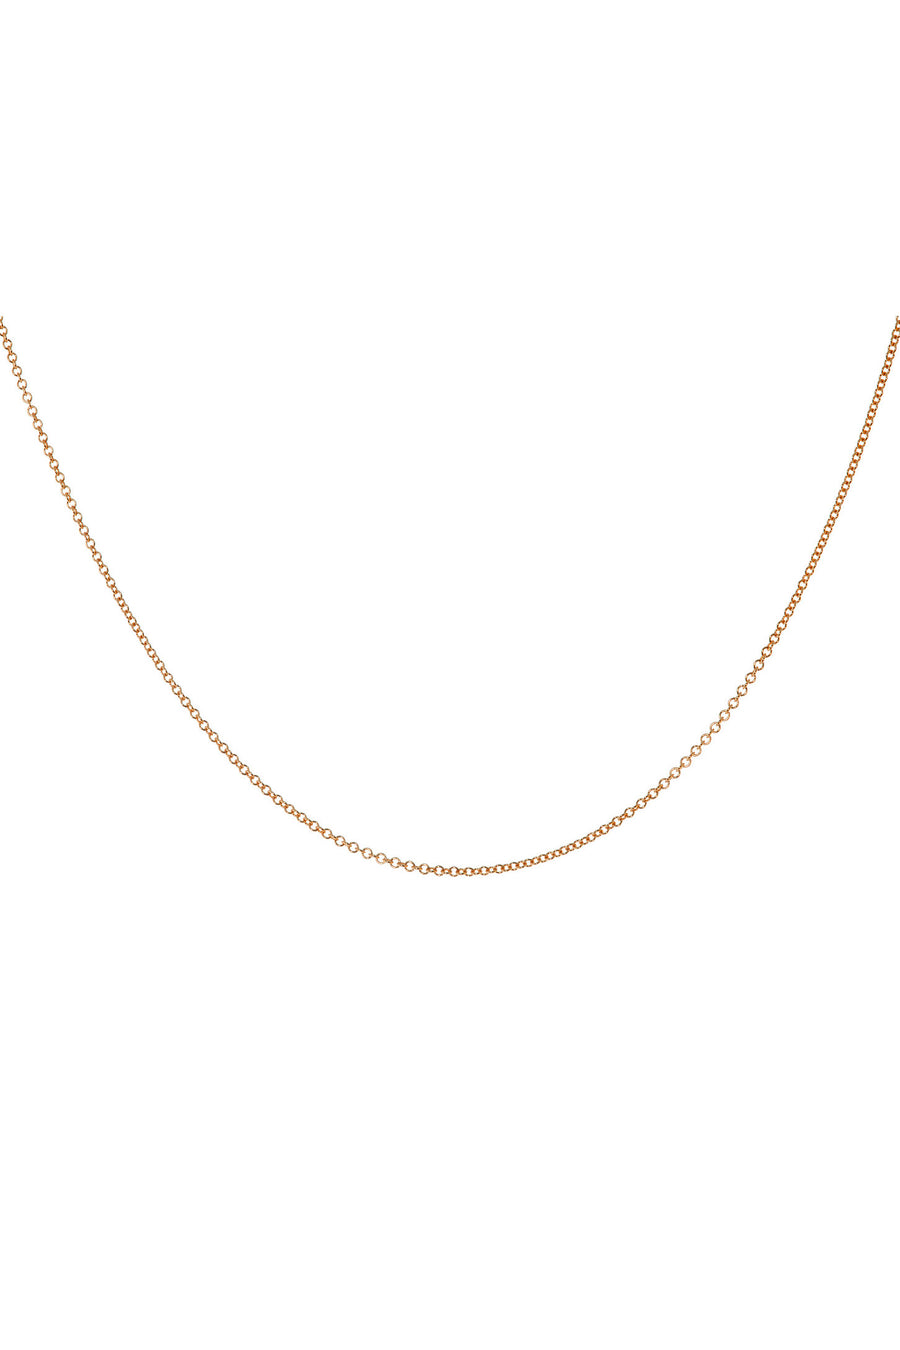 1.3mm Cable Chain Necklace in 14k gold | 20"